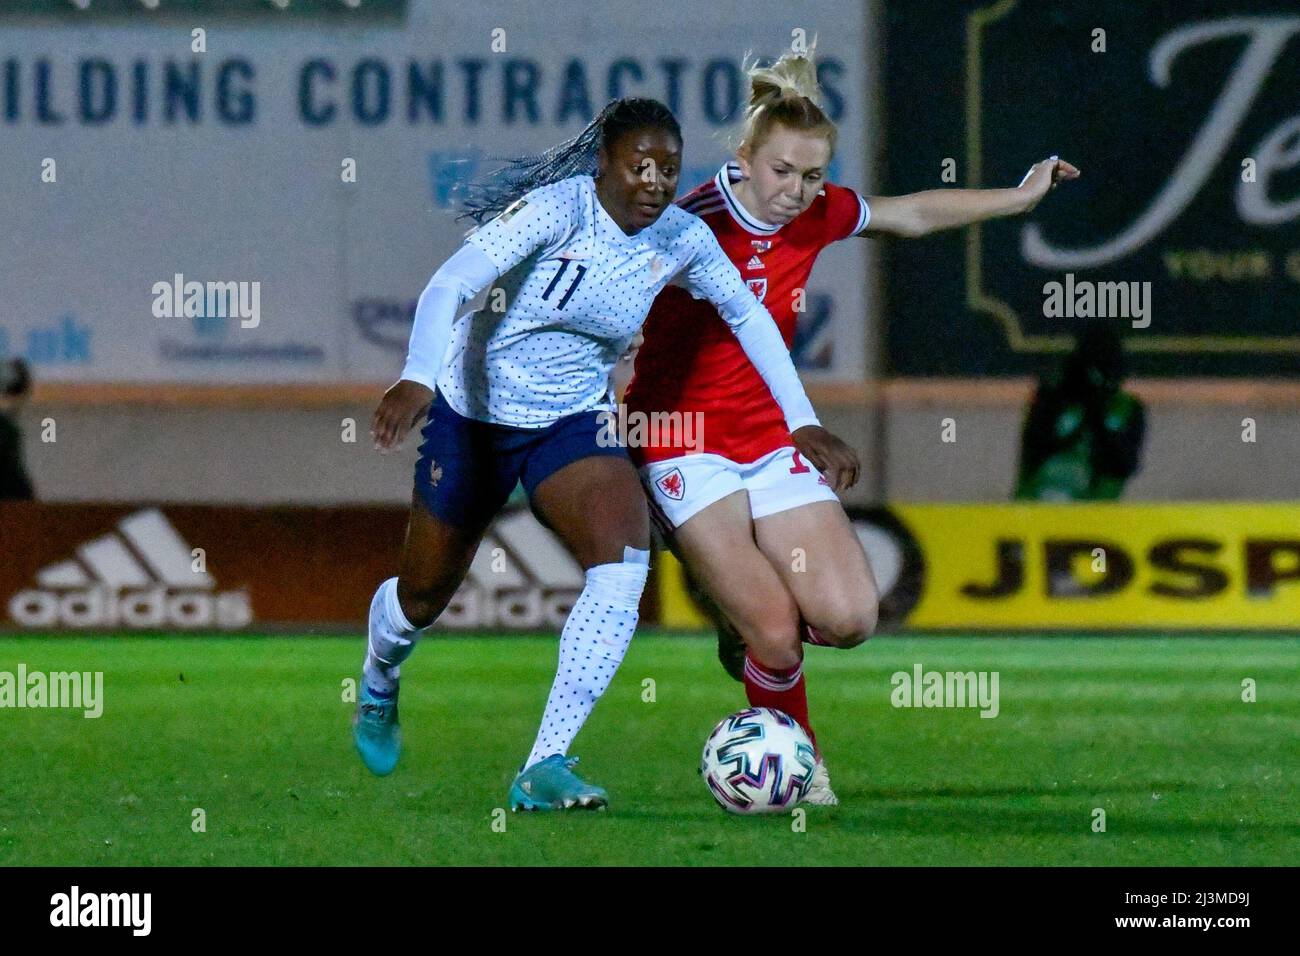 Llanelli, Wales. 8 April 2022. Kadidiatou Diani of France Women (left) battles with Ceri Holland of Wales Women during the FIFA Women's World Cup Qualifier Group I match between Wales Women and France Women at Parc y Scarlets in Llanelli, Wales, UK on 8 April 2022. Credit: Duncan Thomas/Majestic Media. Stock Photo